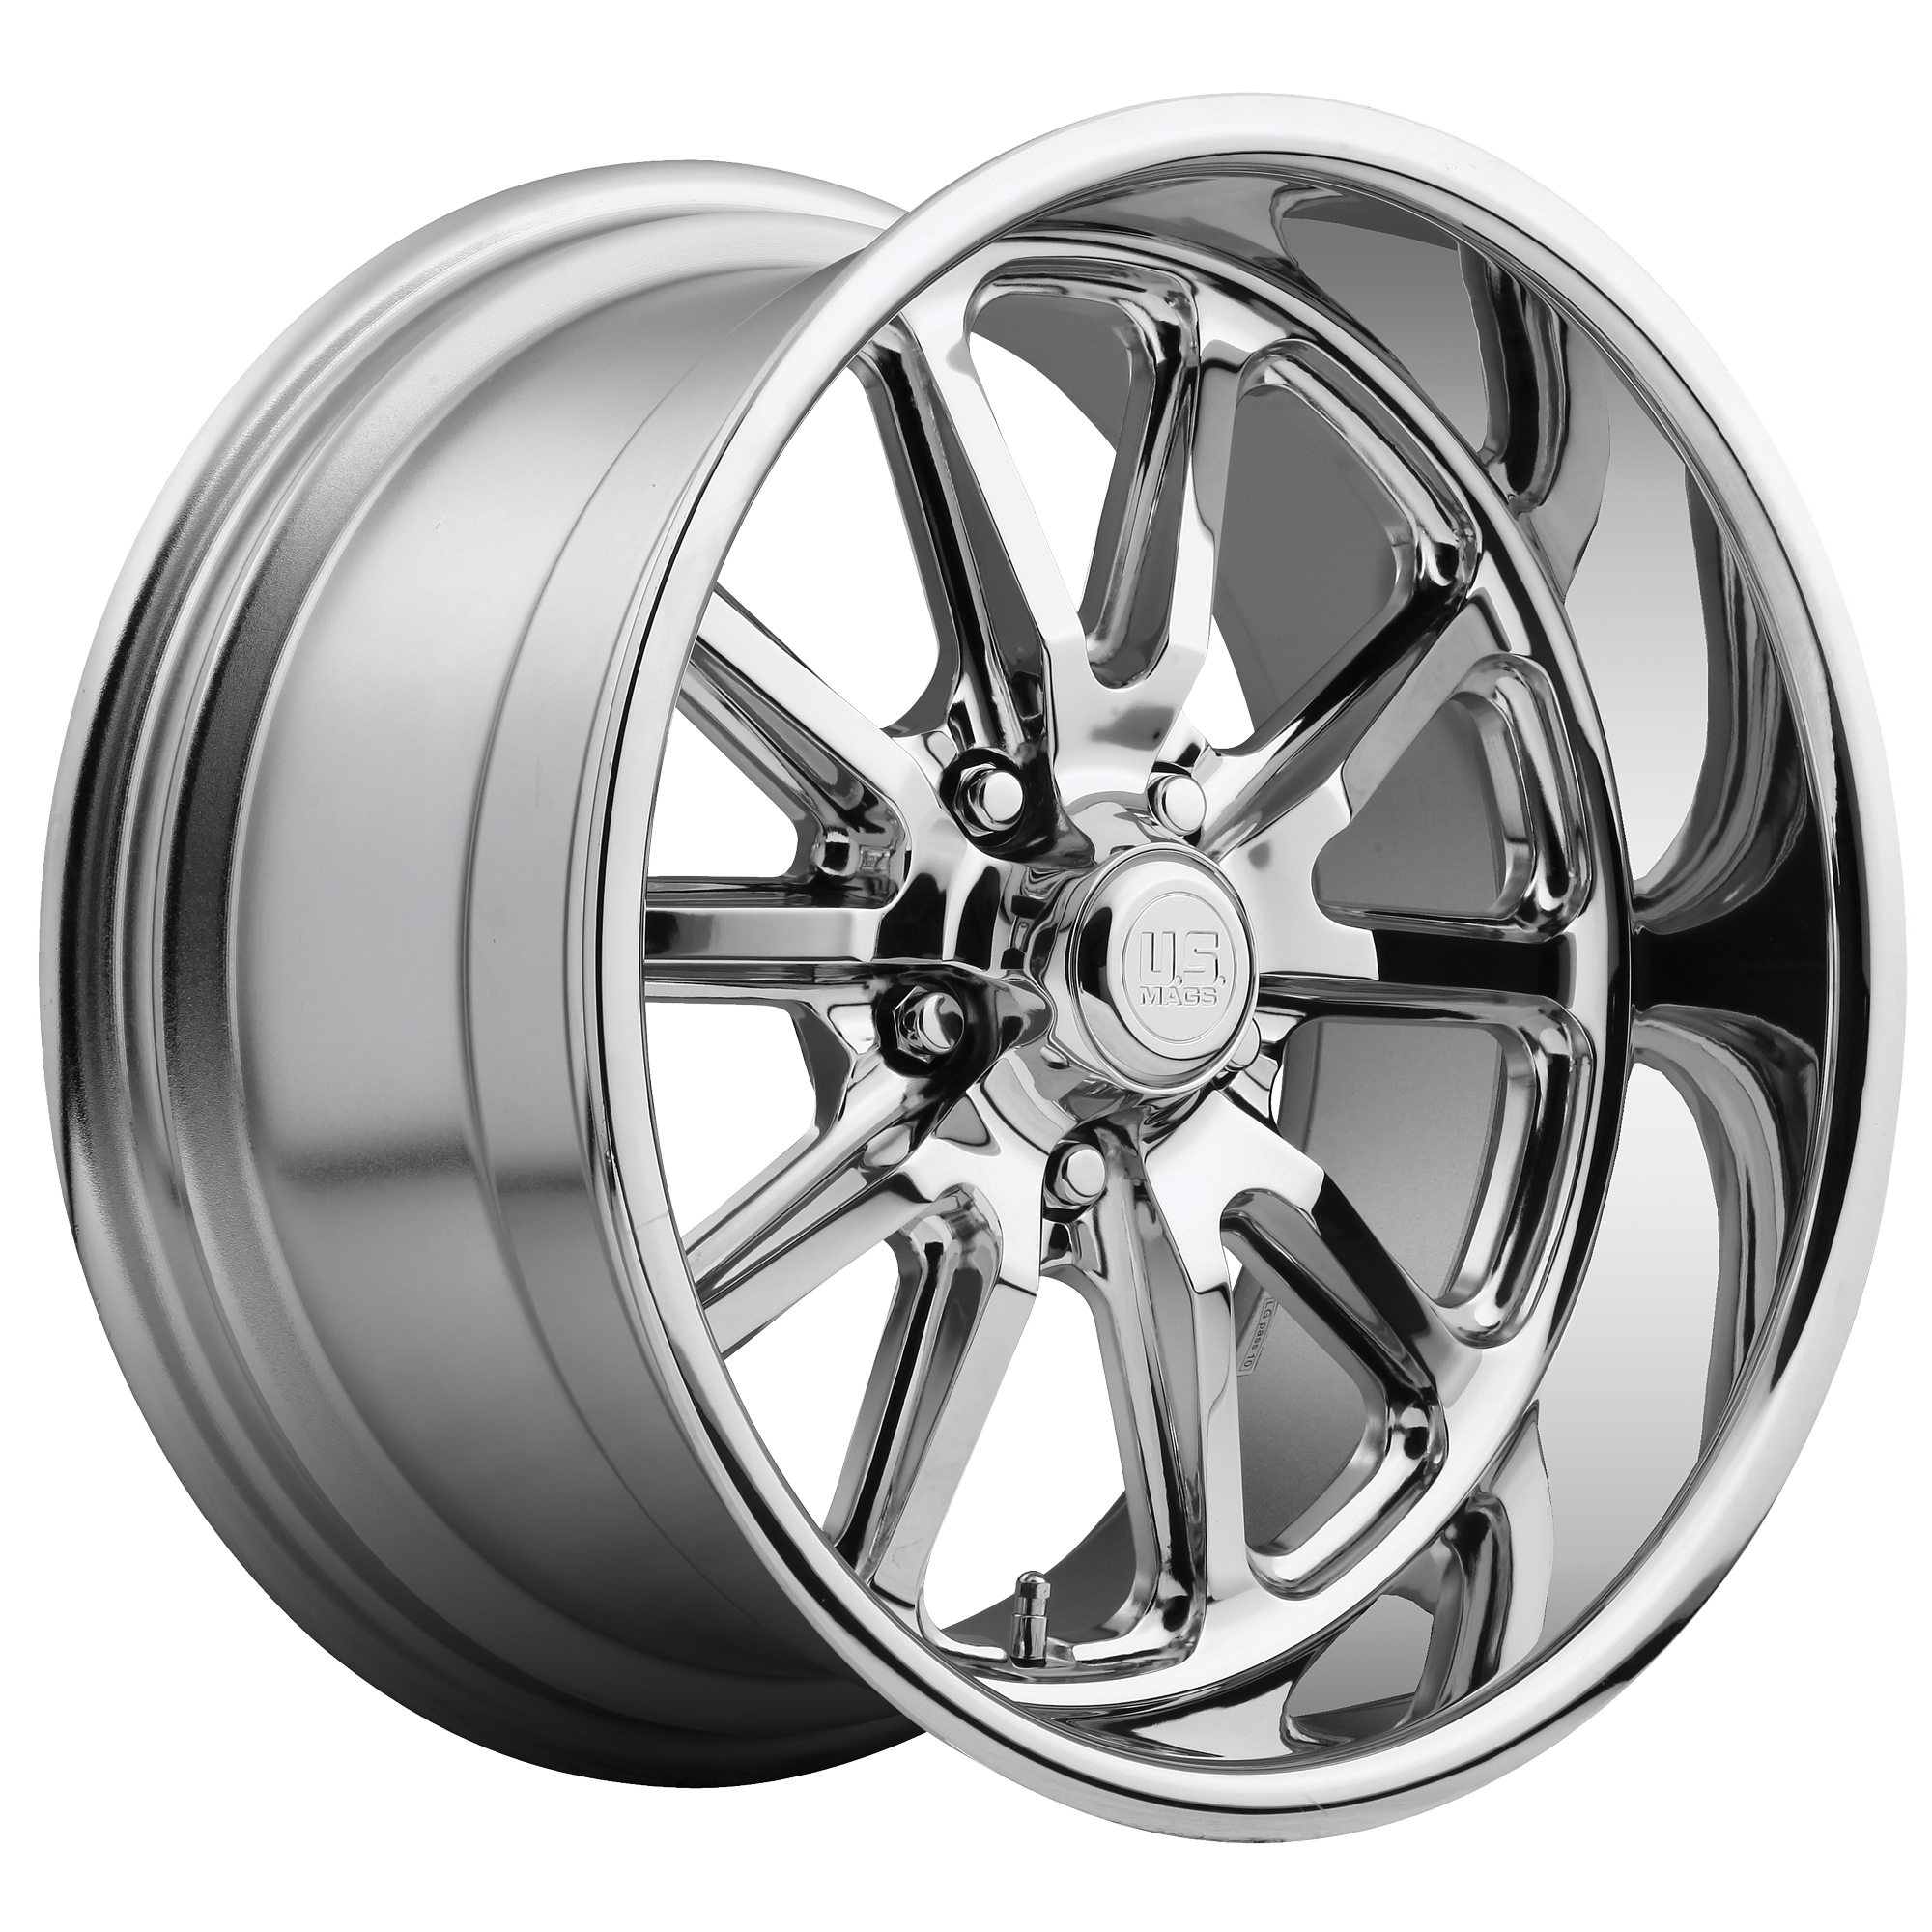 RAMBLER 17x8 5x120.65 CHROME PLATED (1 mm) - Tires and Engine Performance